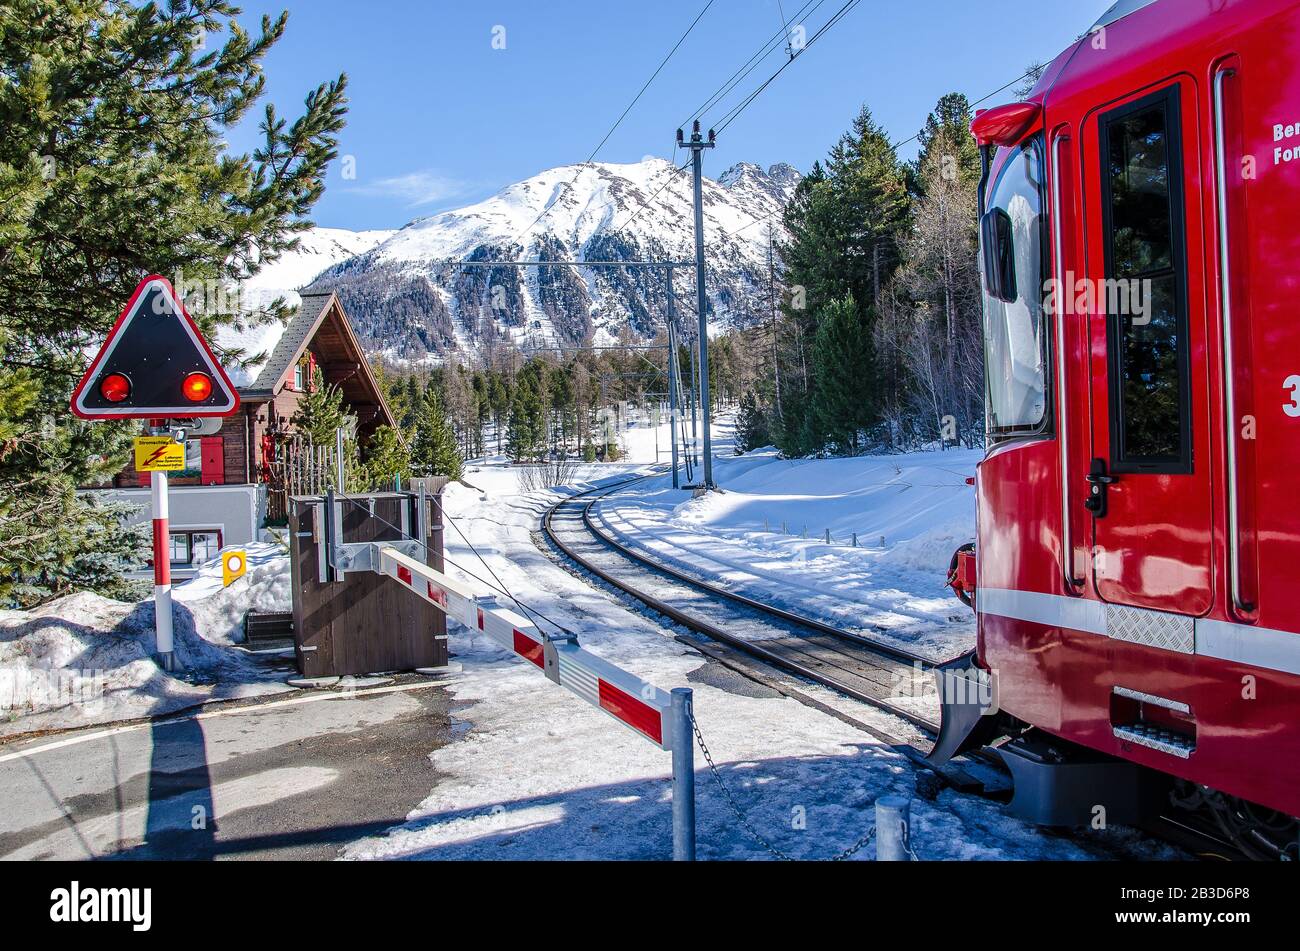 The Rhaetian Railway abbreviated RhB, is a Swiss transport company that owns the largest network of all private railway operators in Switzerland. Stock Photo